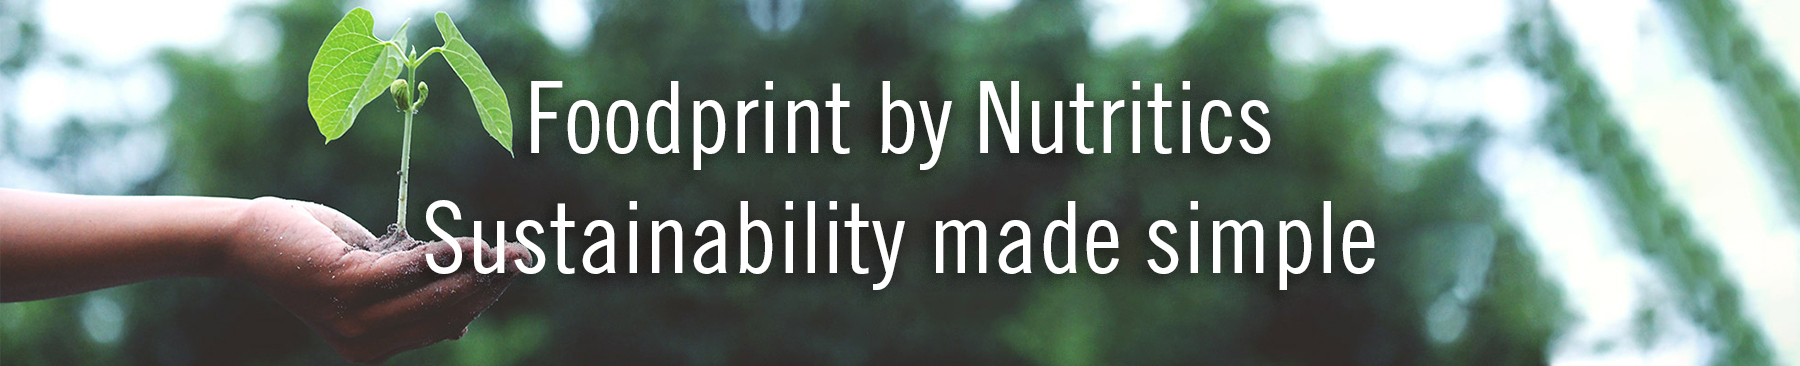 Footprint by Nutritics – Sustainability made simple